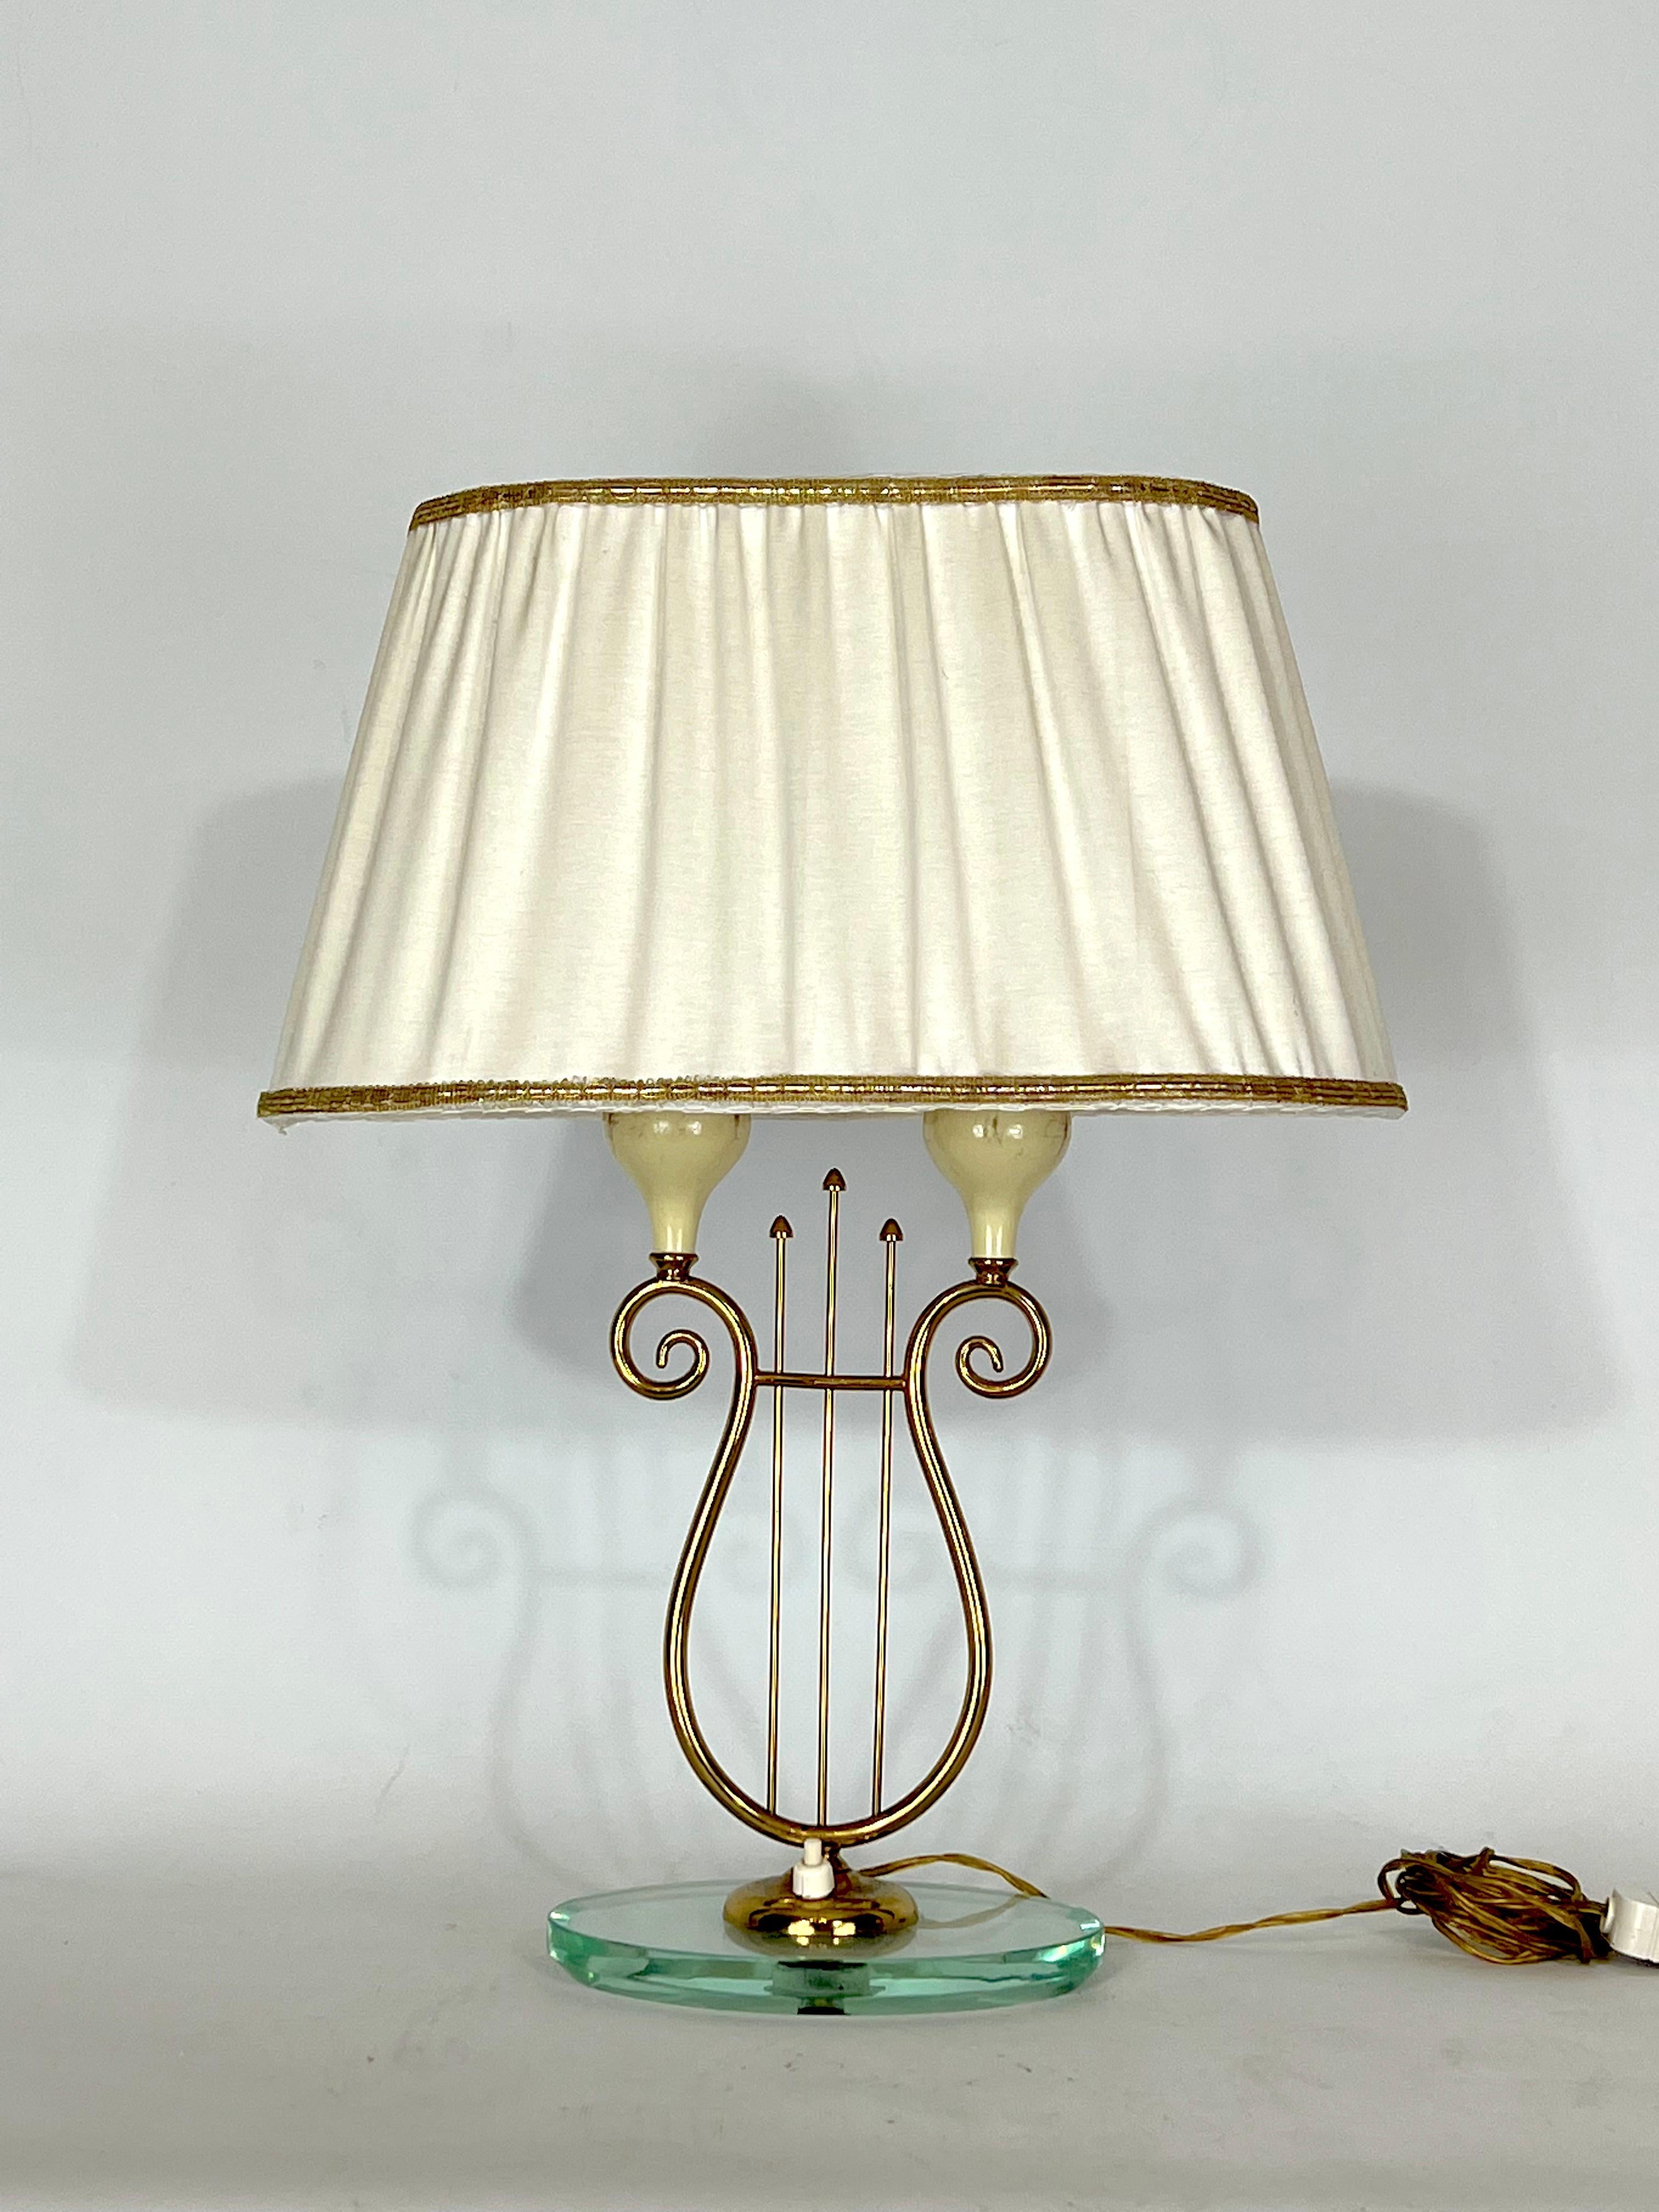 Vintage condition with trace of age and use for this table lamp produced in Italy during the 50s and made from brass and thick glass on the base. Full working with EU standard, adaptable on demand for USA standard.